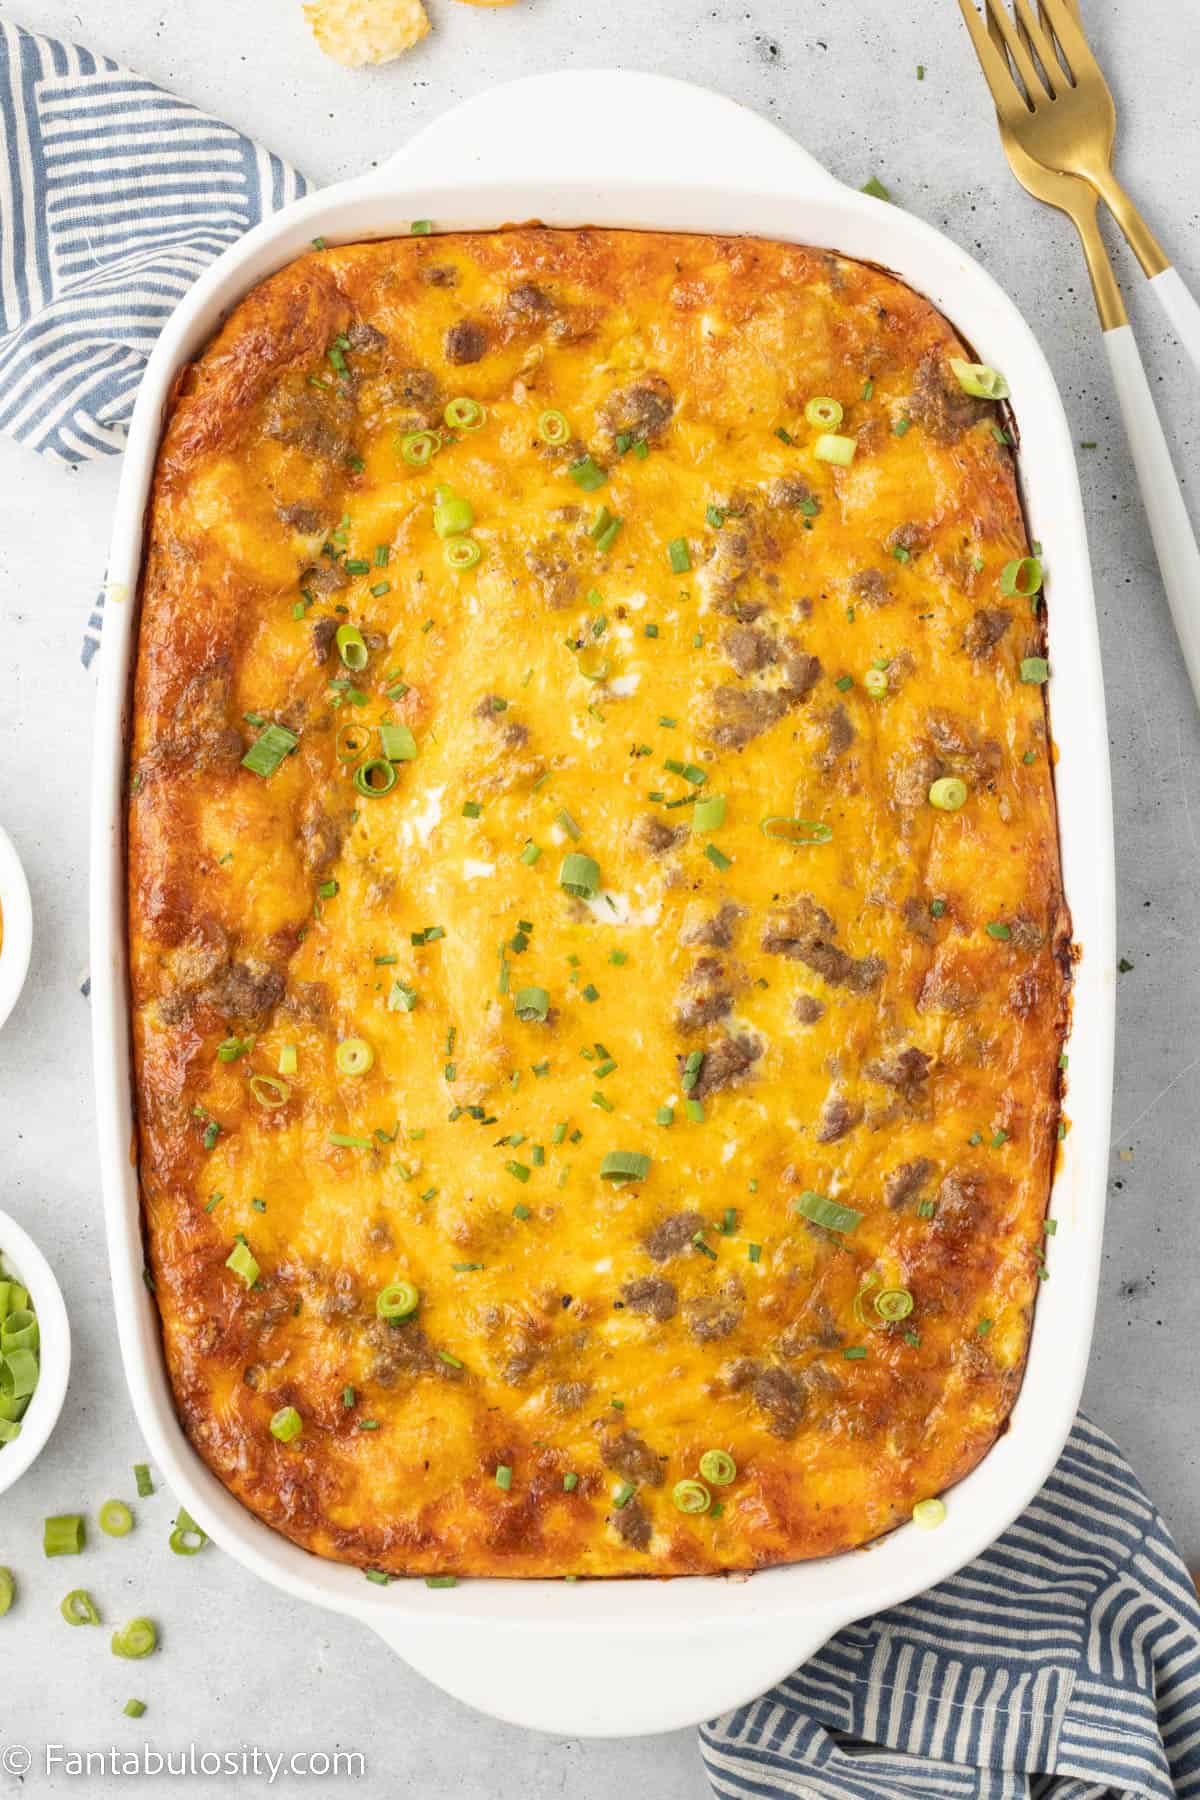 Baked Sausage and Egg Casserole